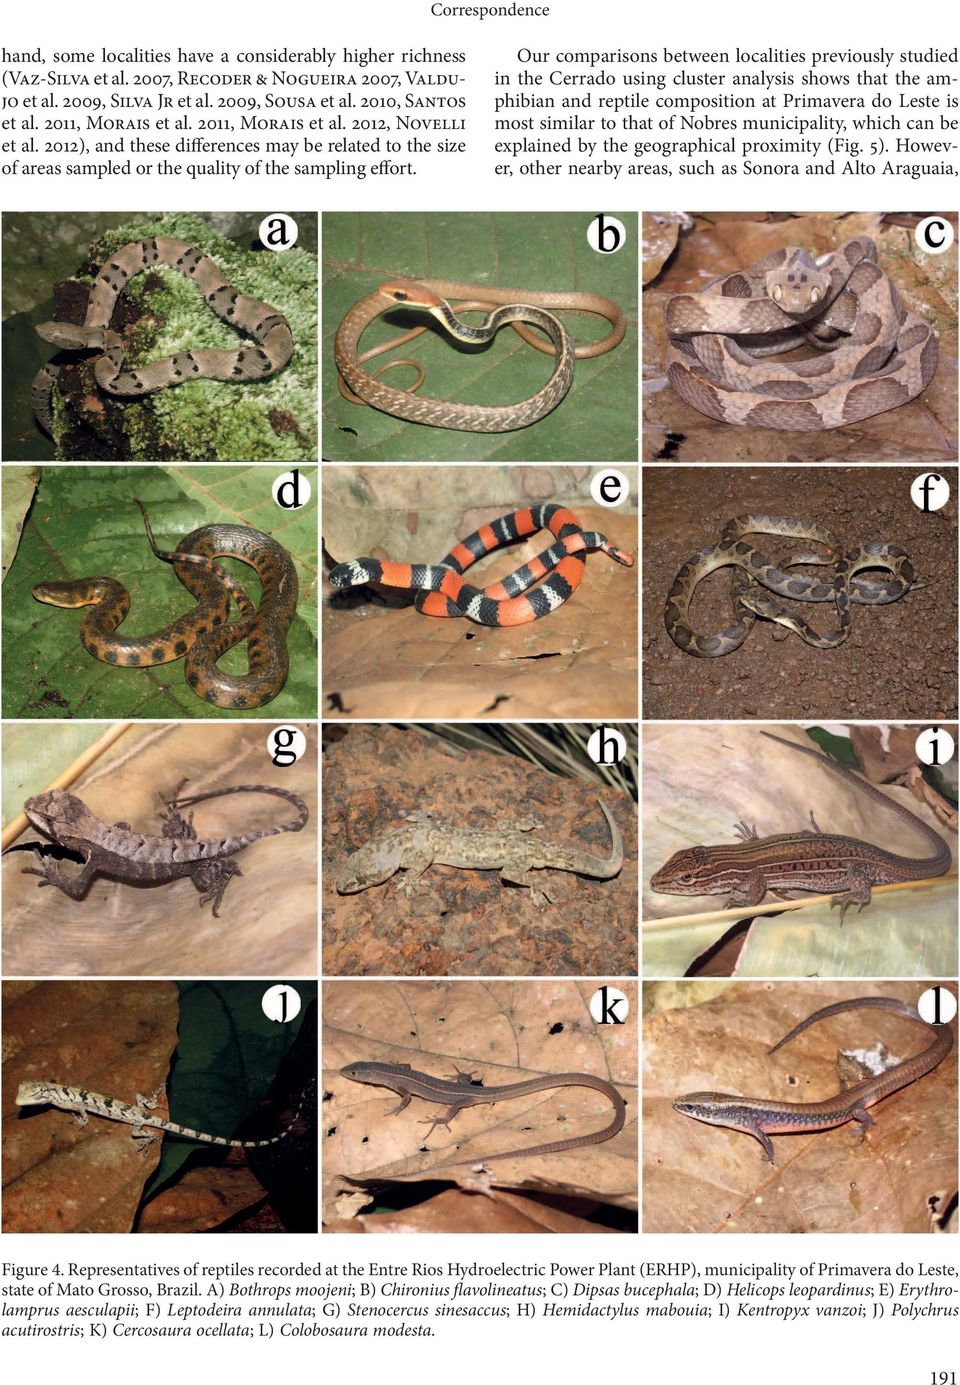 Our comparisons between localities previously studied in the Cerrado using cluster analysis shows that the amphibian and reptile composition at Primavera do Leste is most similar to that of Nobres